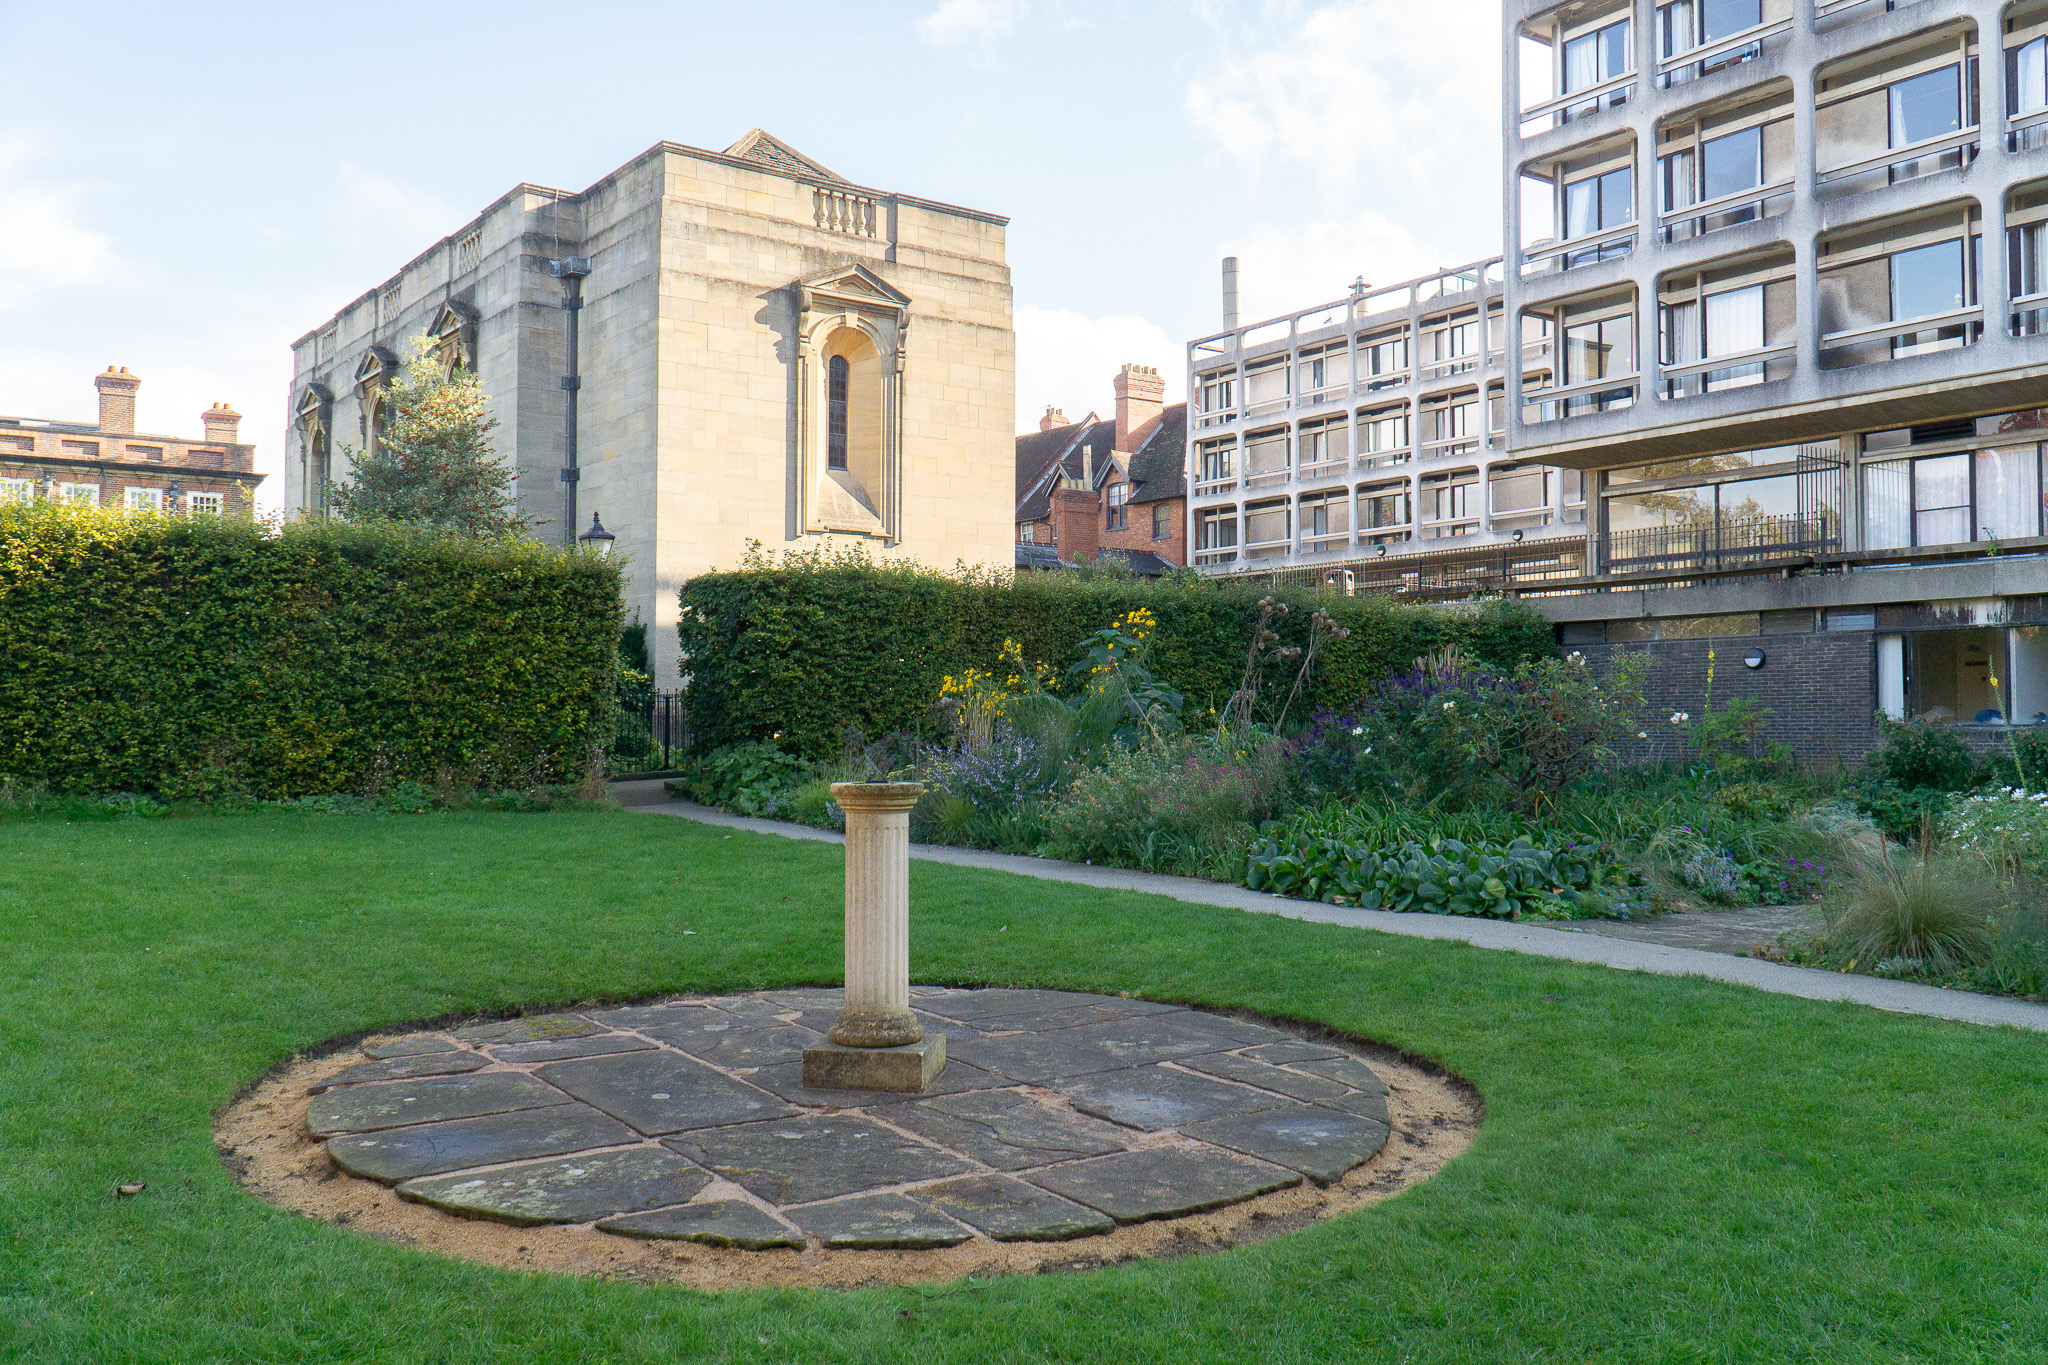 One of our recent projects has been to renovate the sundial patio, which we have lifted and relaid ready for the planting of a lavendar bed later in the year. The sundial was commissioned by the college in 1926 to commemorate our founding Principal, Madeleine Shaw Lefevre.